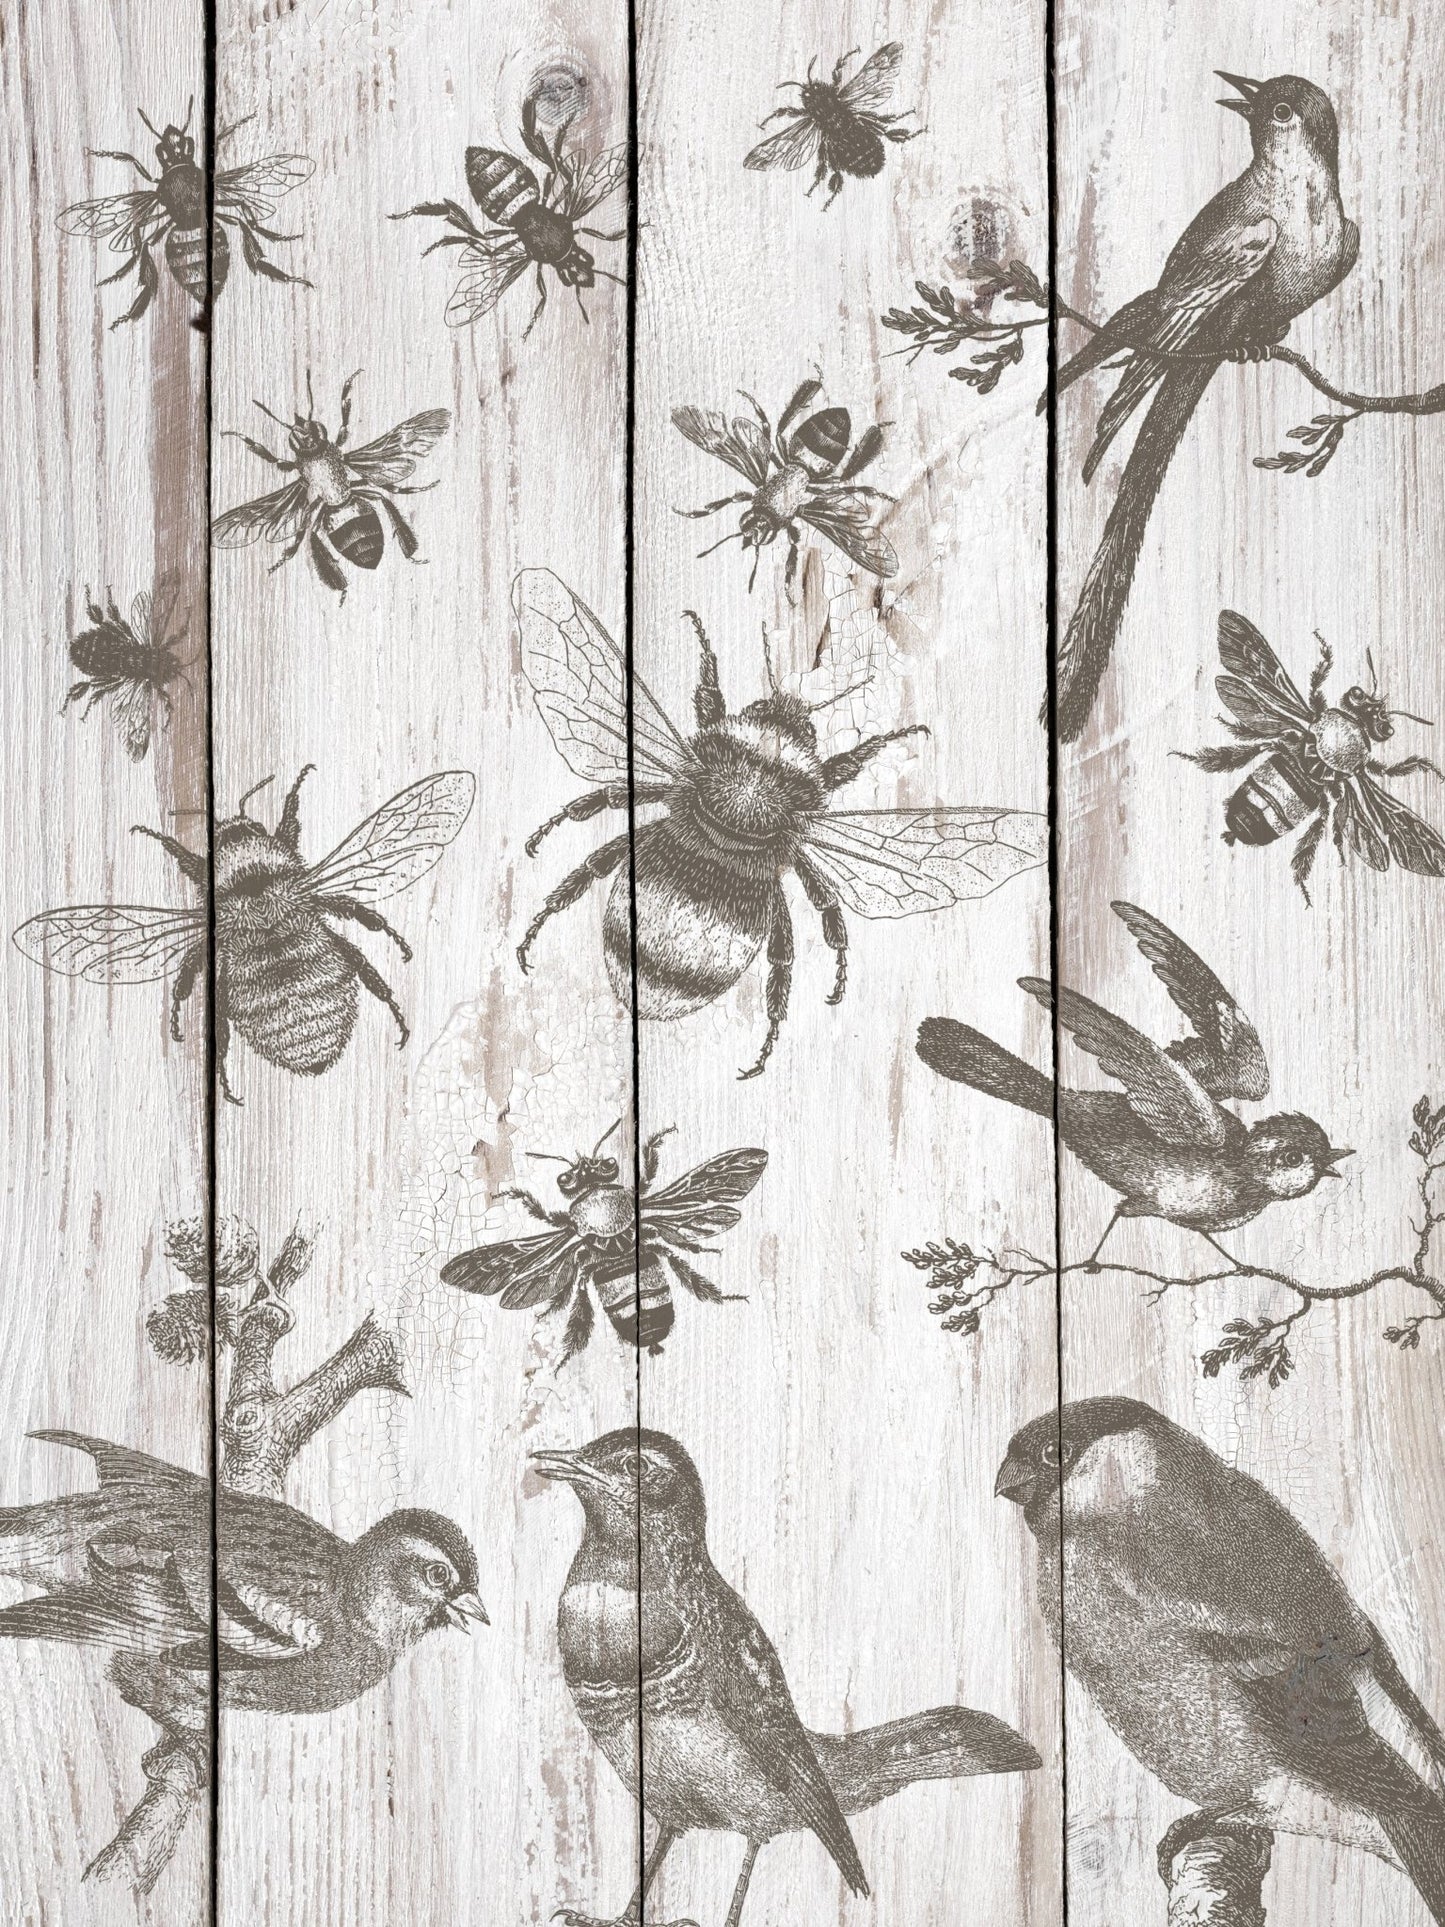 Iron Orchid Designs - Birds & Bees Decor Stamp - Rustic River Home